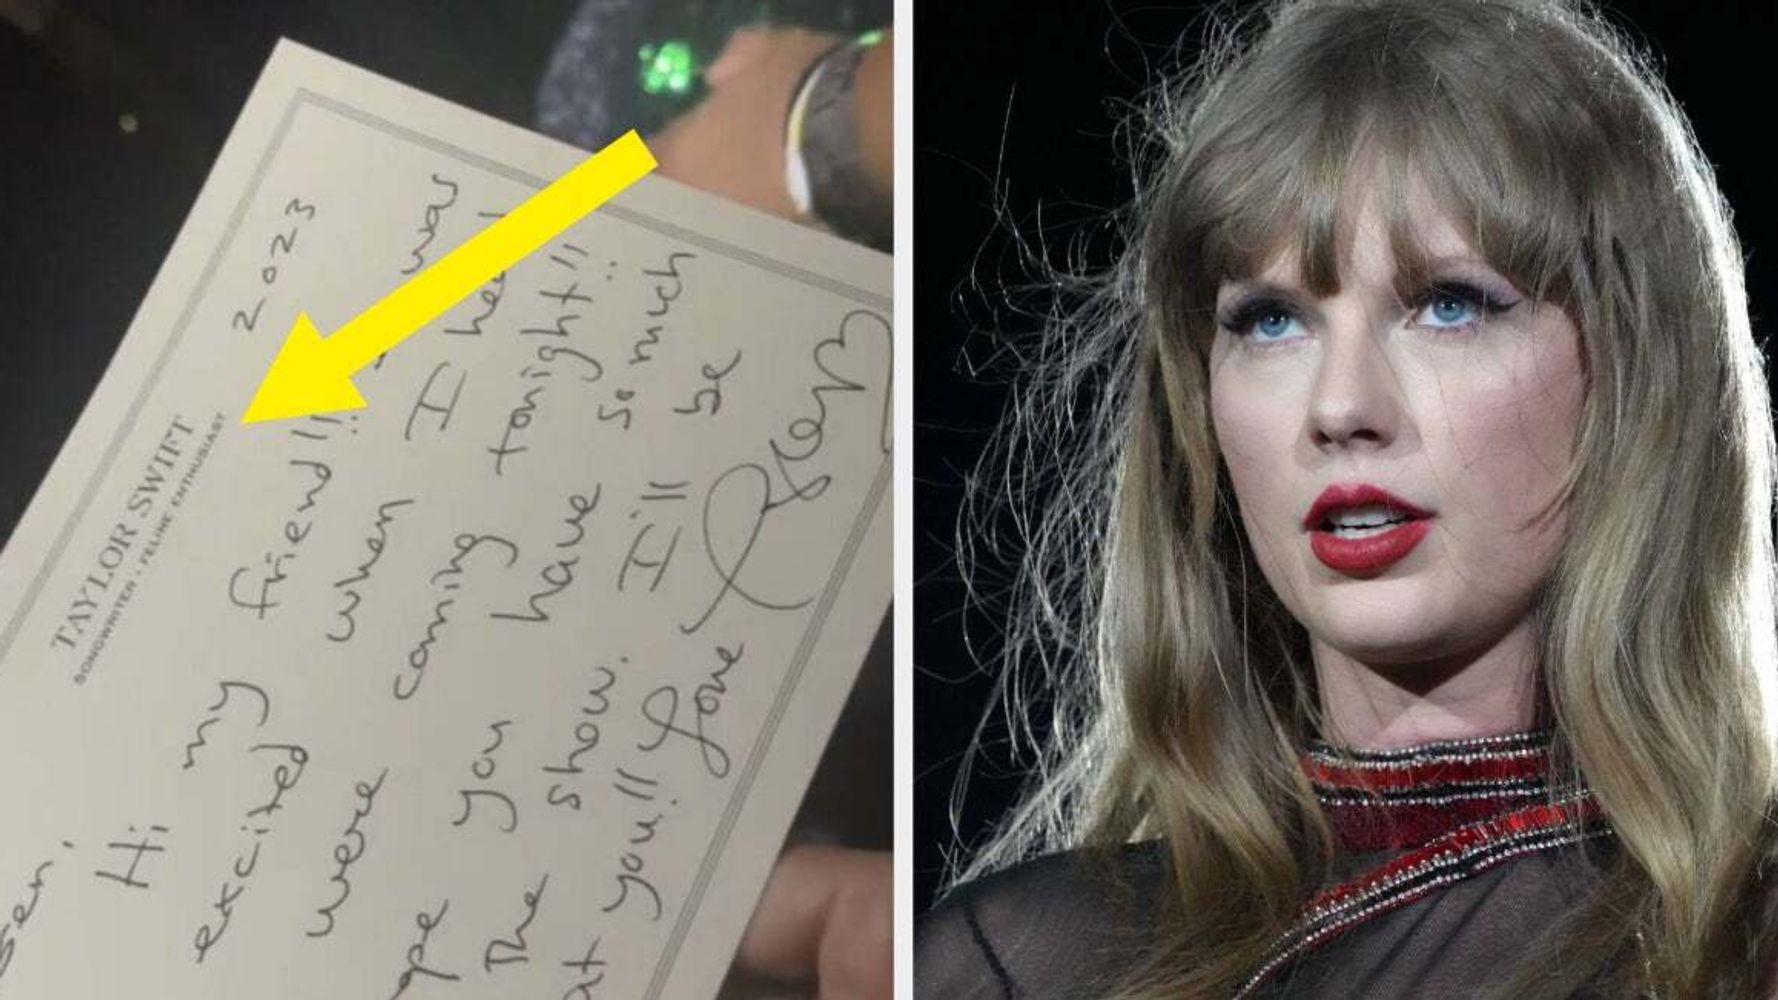 Taylor Swift Gets Special Gift From 'The Hunger Games' Author